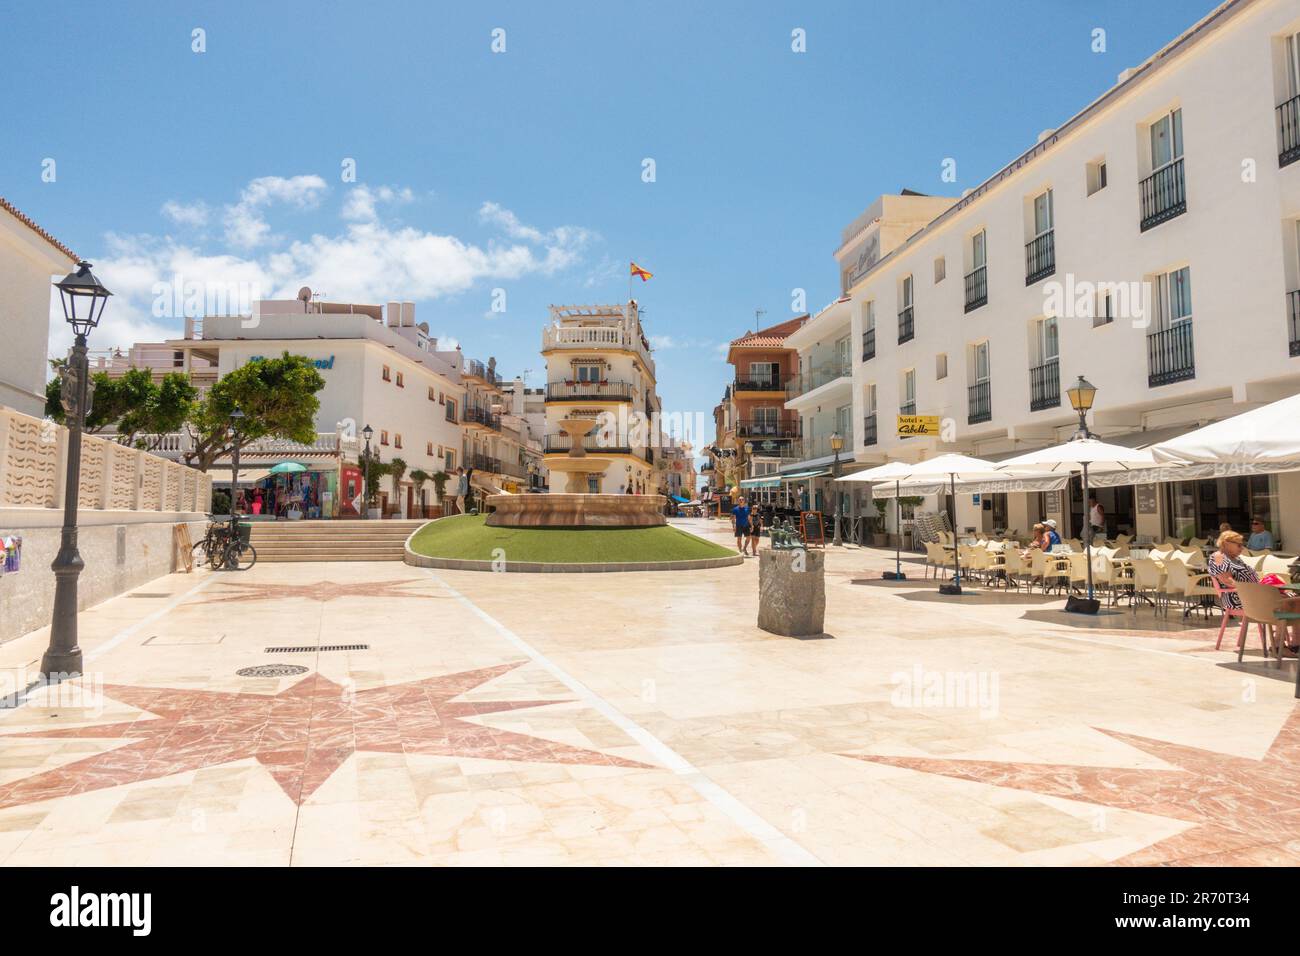 Square on a hot day at Carihuela with restaurants and bars, Torremolinos, Costa del Sol, Spain. Stock Photo